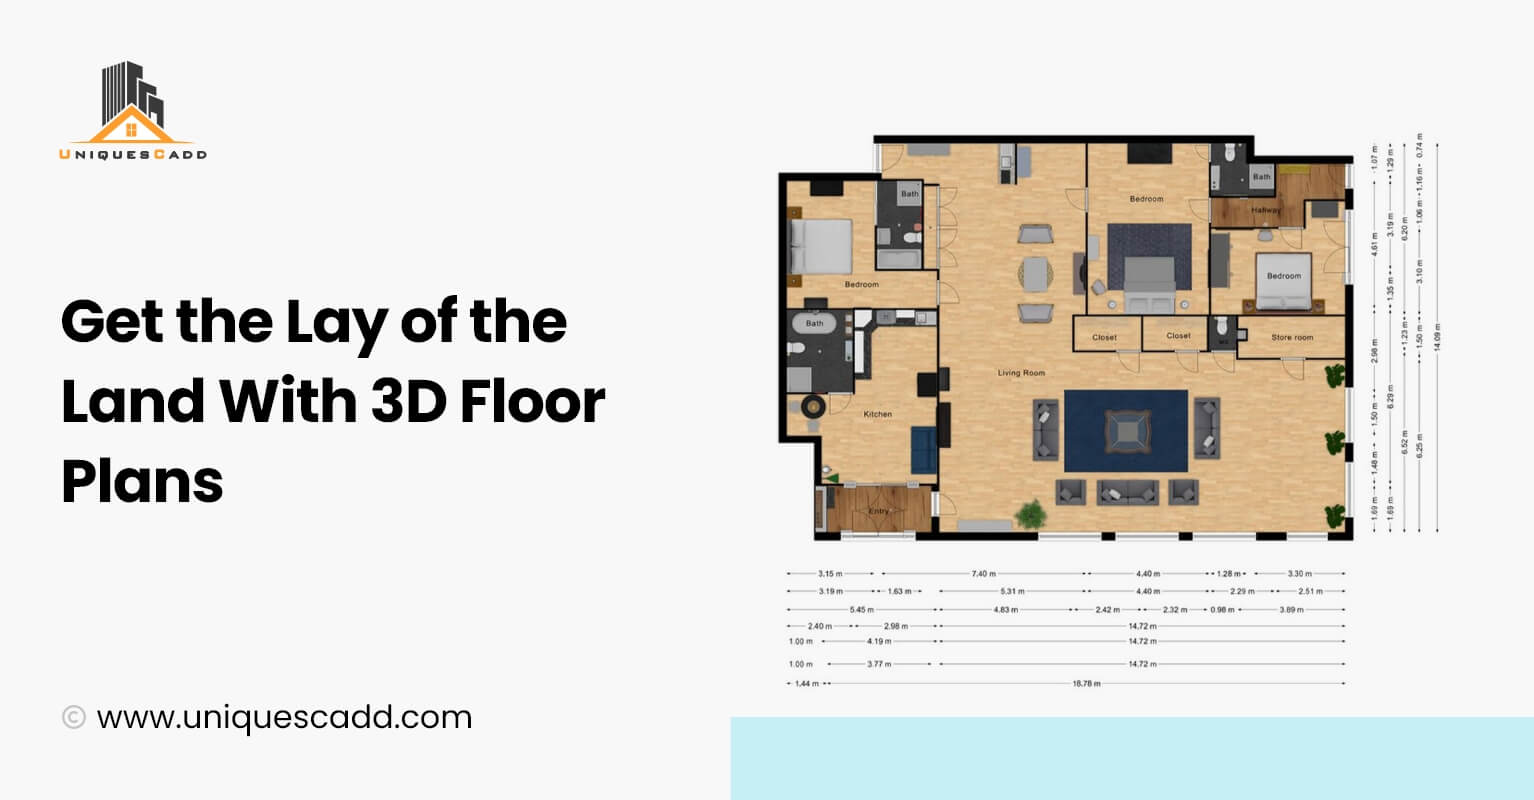 Get the lay of the land with 3D floor plans